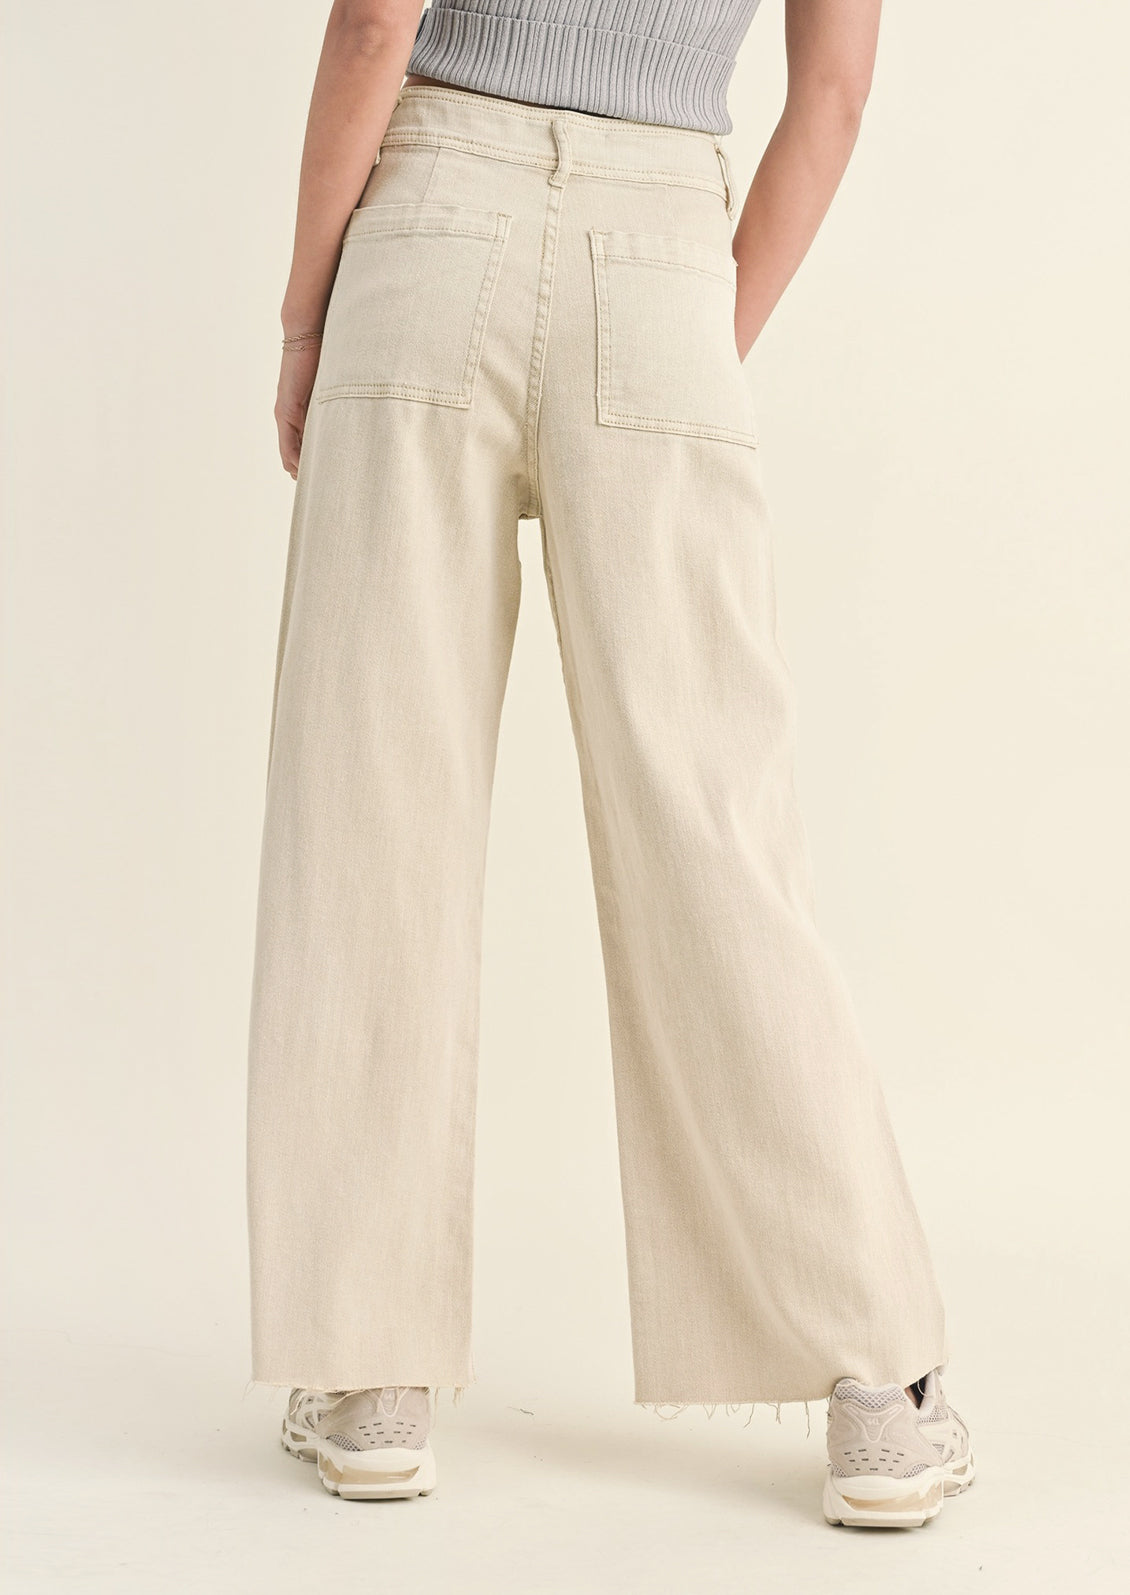 A pair of beige colored wide leg pants with back pockets.